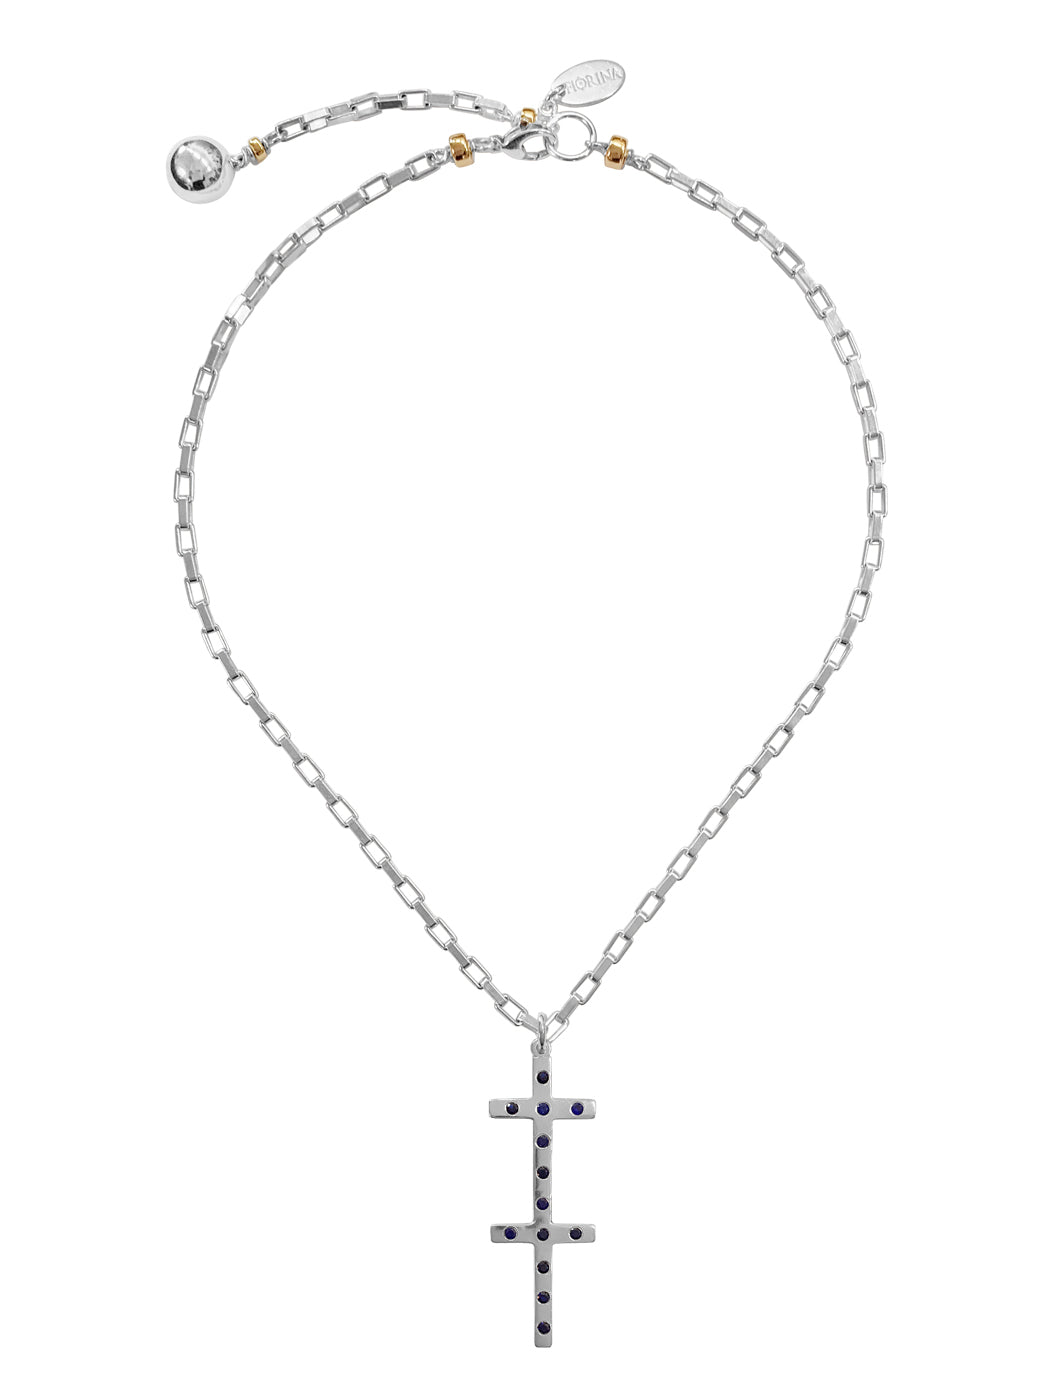 Buy Stainless Steel Cross Necklace for Men Silver Cross Necklace for boy  Small Cross Pendant Necklace Simple Jewelry Cross Chain for Mens, Stainless  Steel, No Gemstone, at Amazon.in